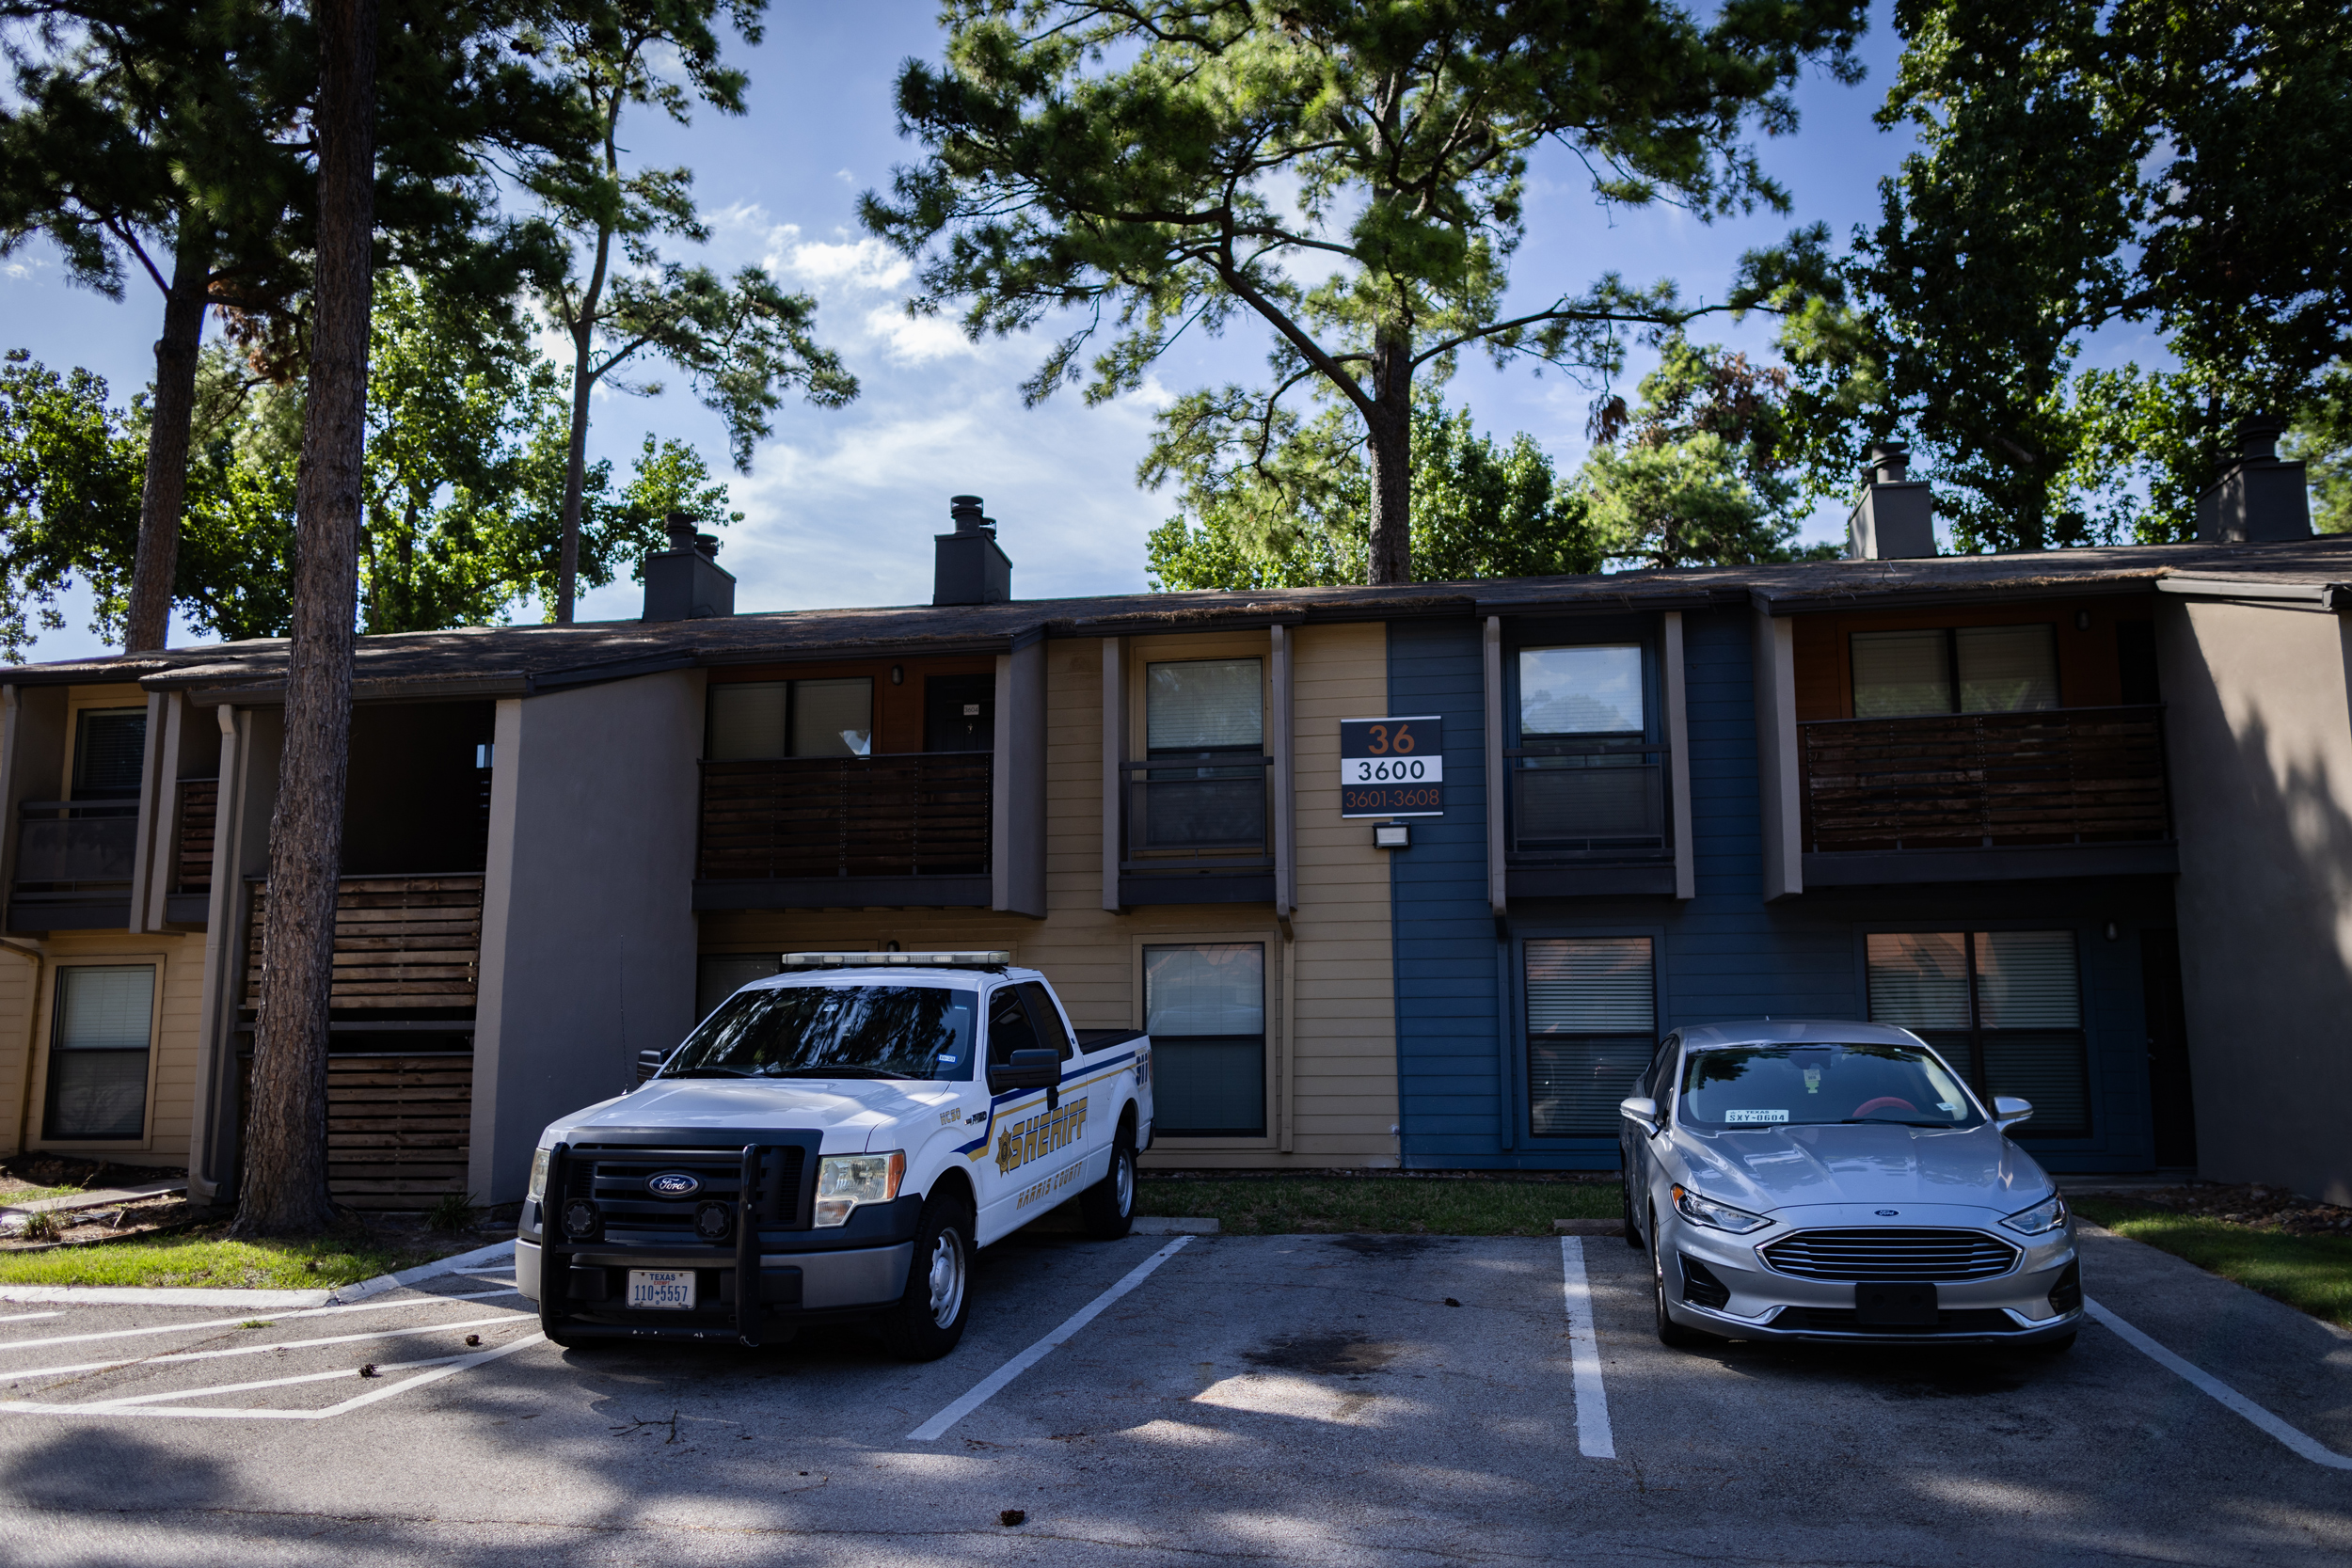 A Harris County Sheriff's Office vehicle parked in an apartment complex 